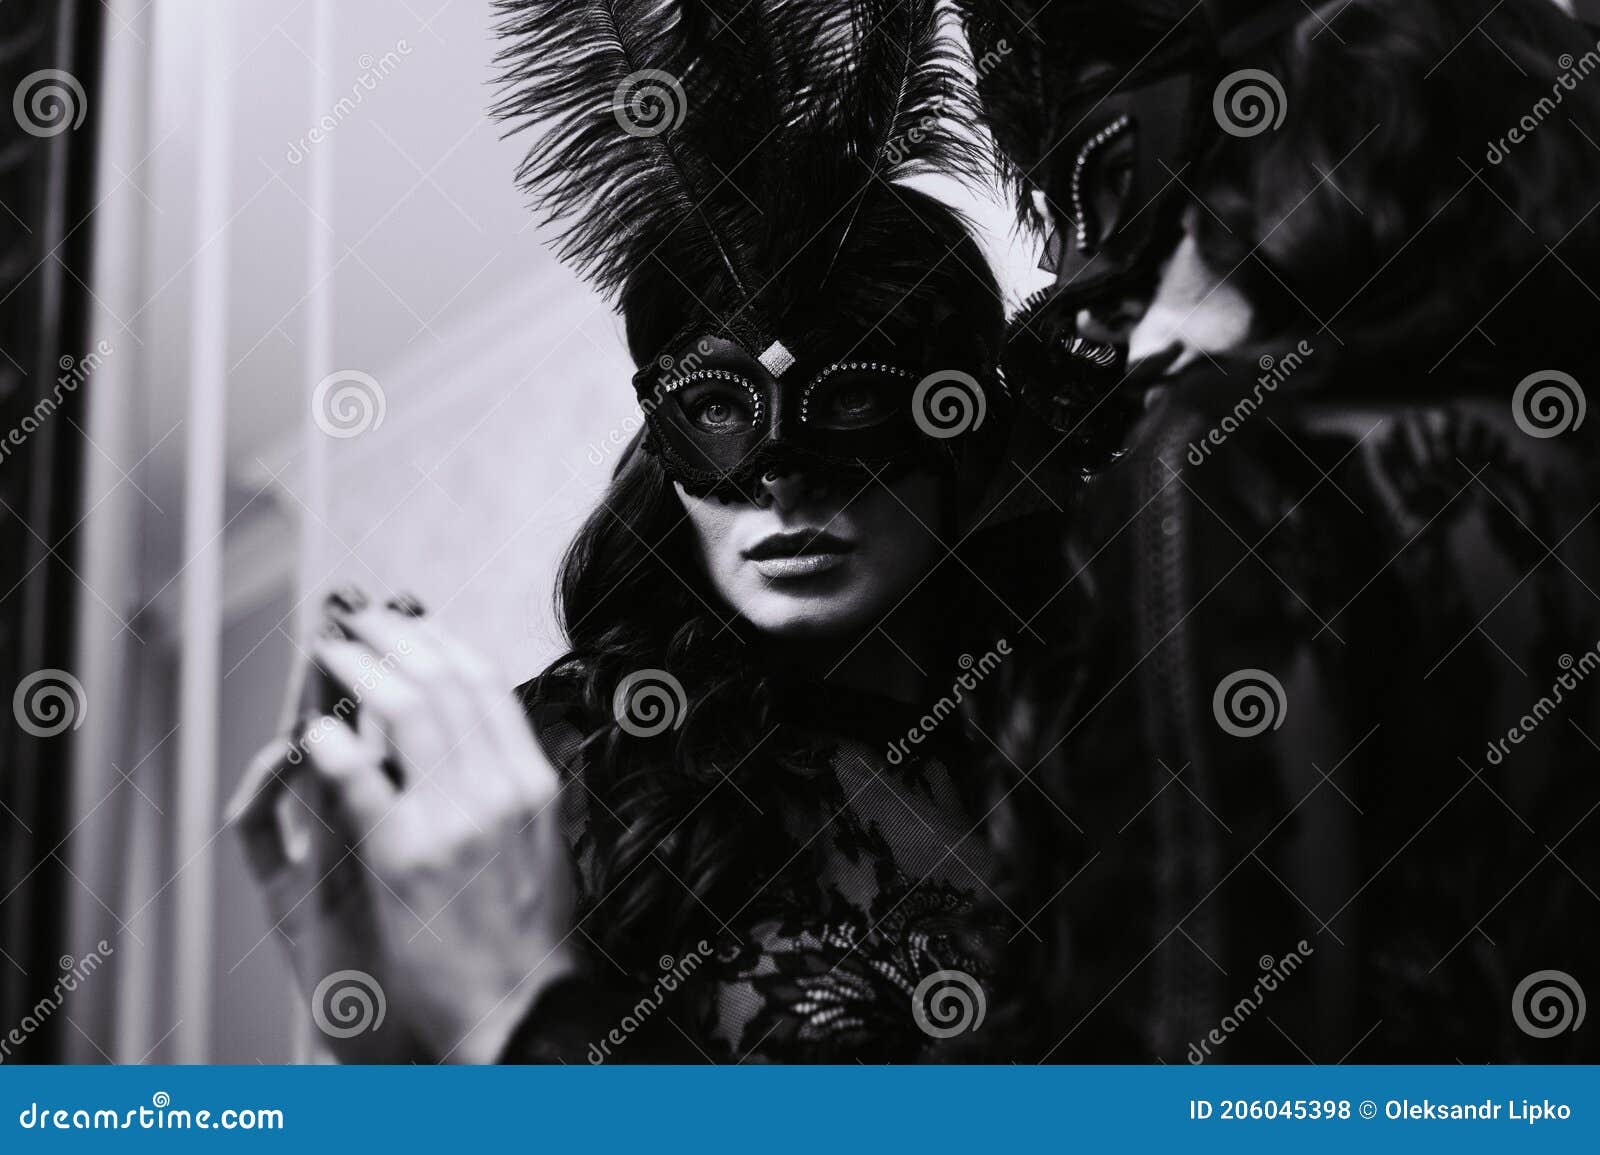 glamorous brunette lady with a beautiful hairstyle and red lips, in an evening dress, a venetian black mask with stylish accessori